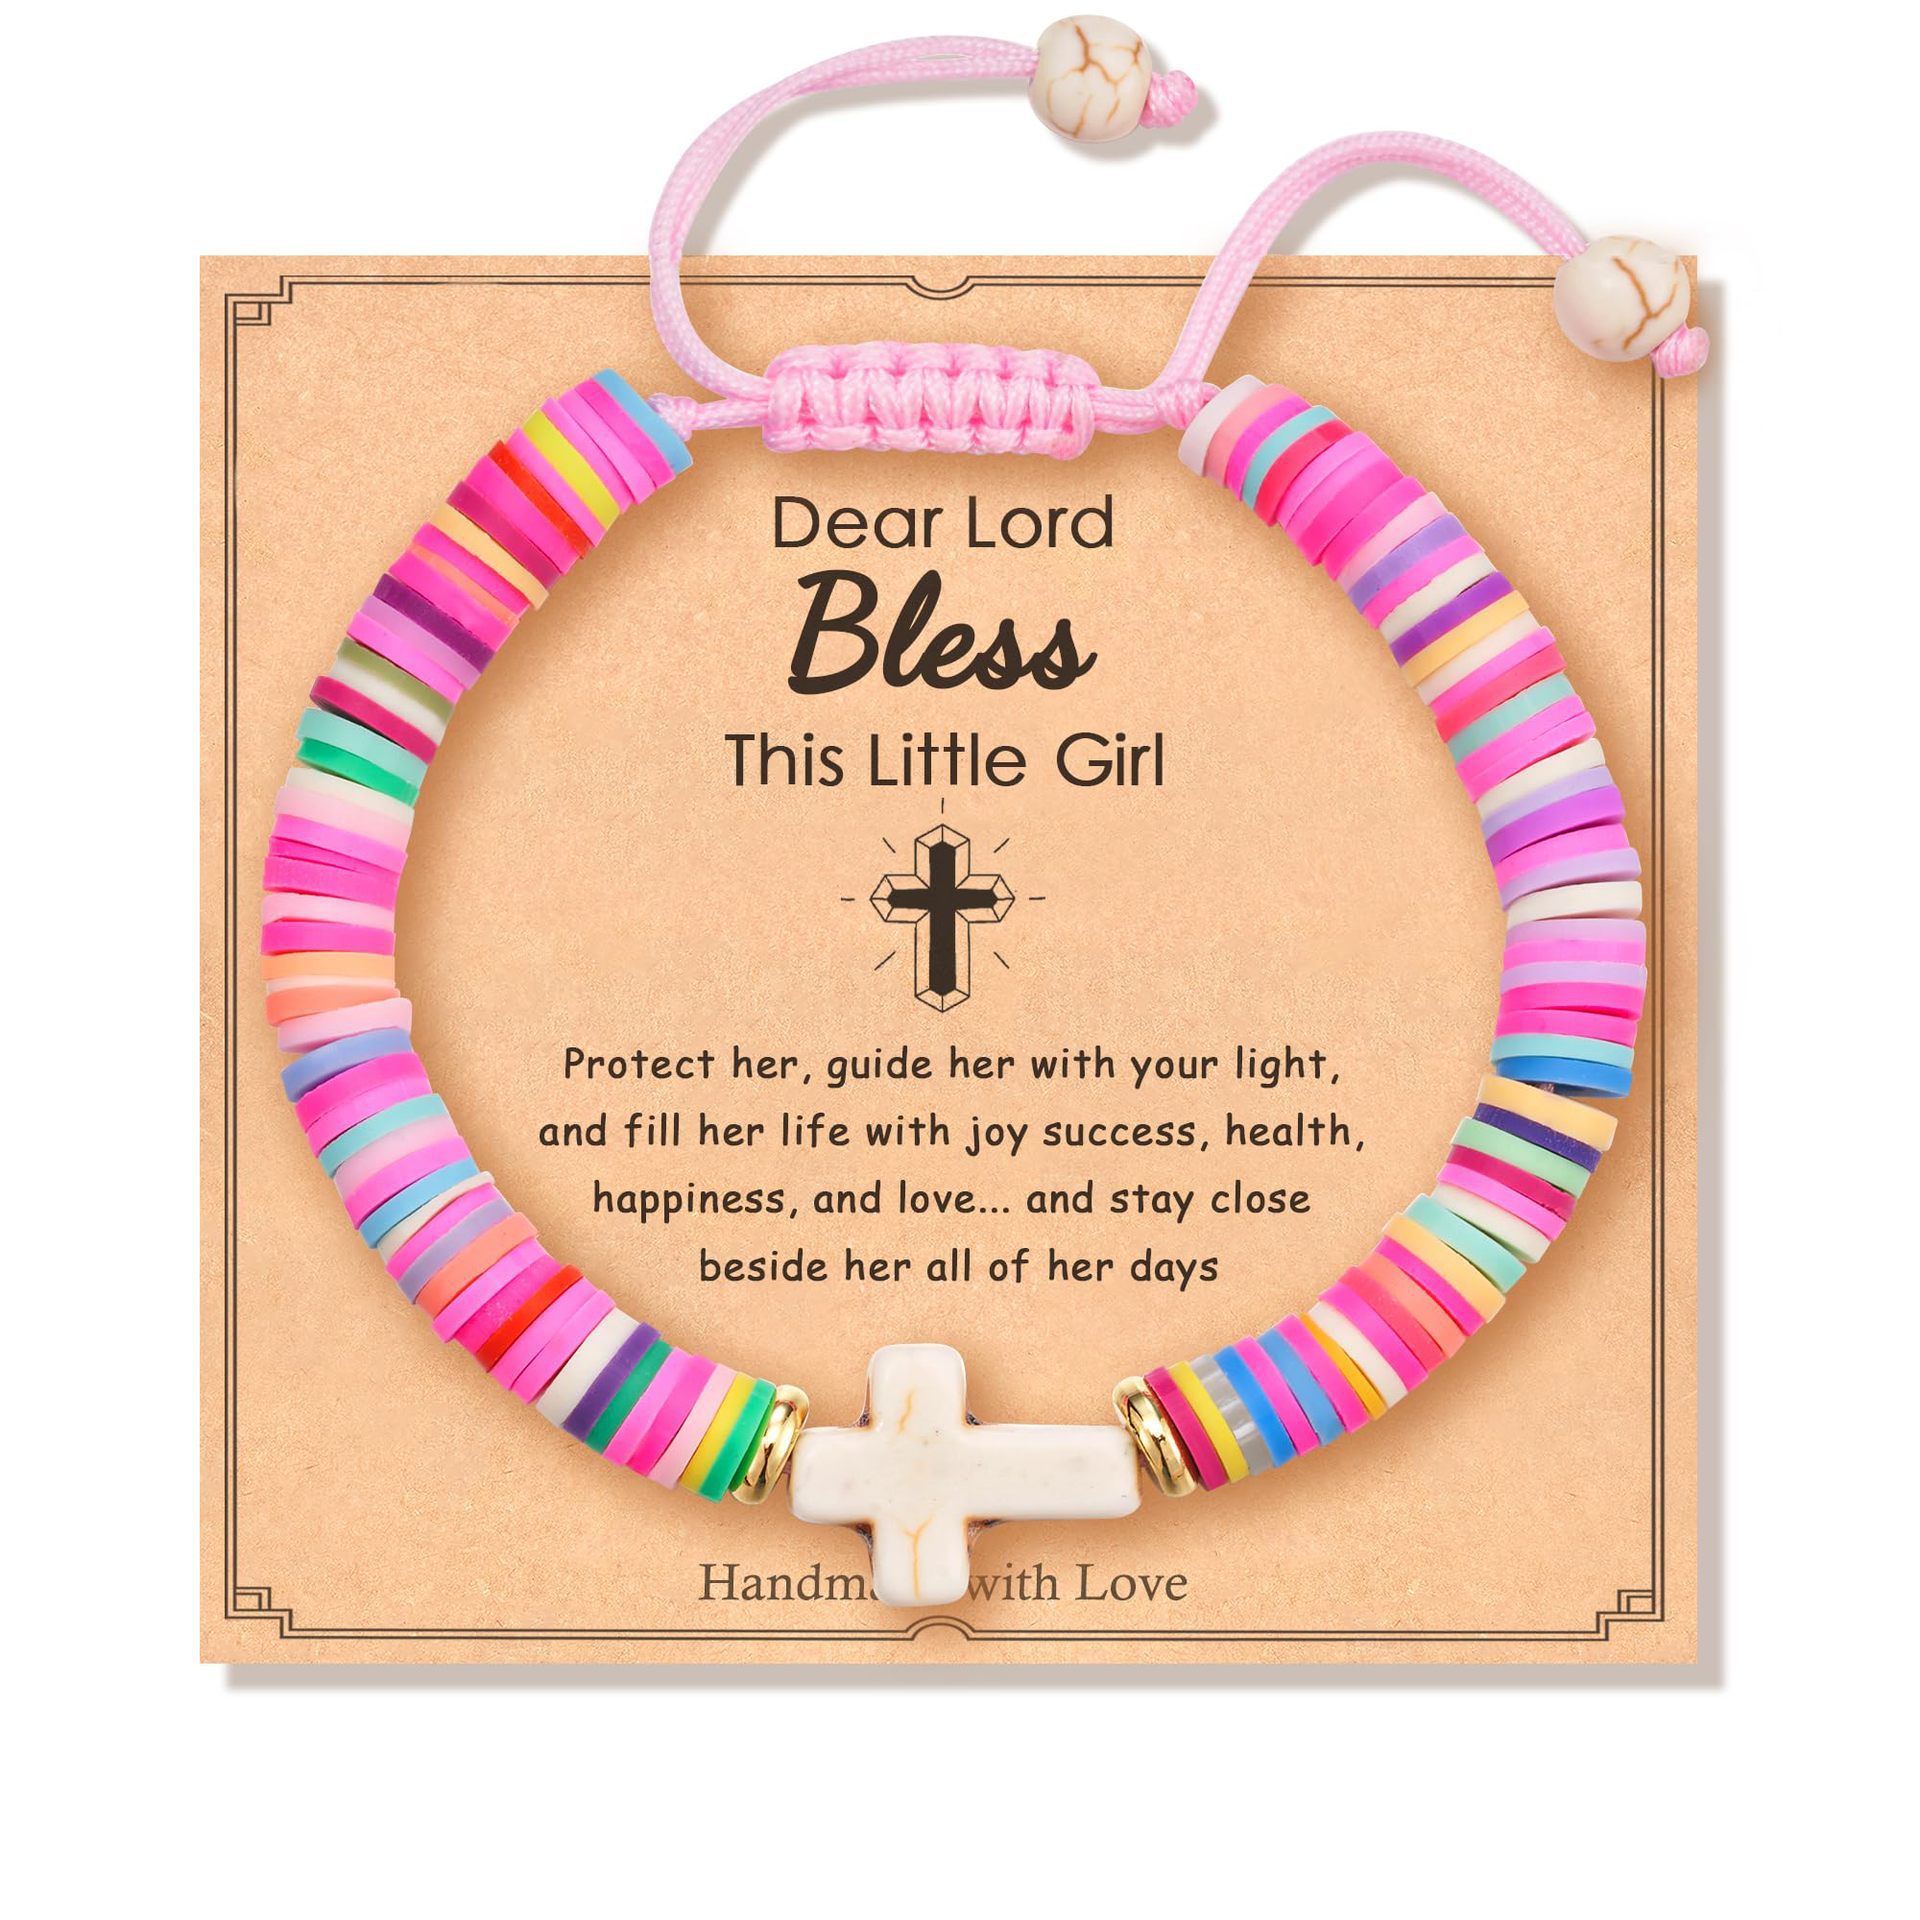 Dear Lord Bless bracelet with card